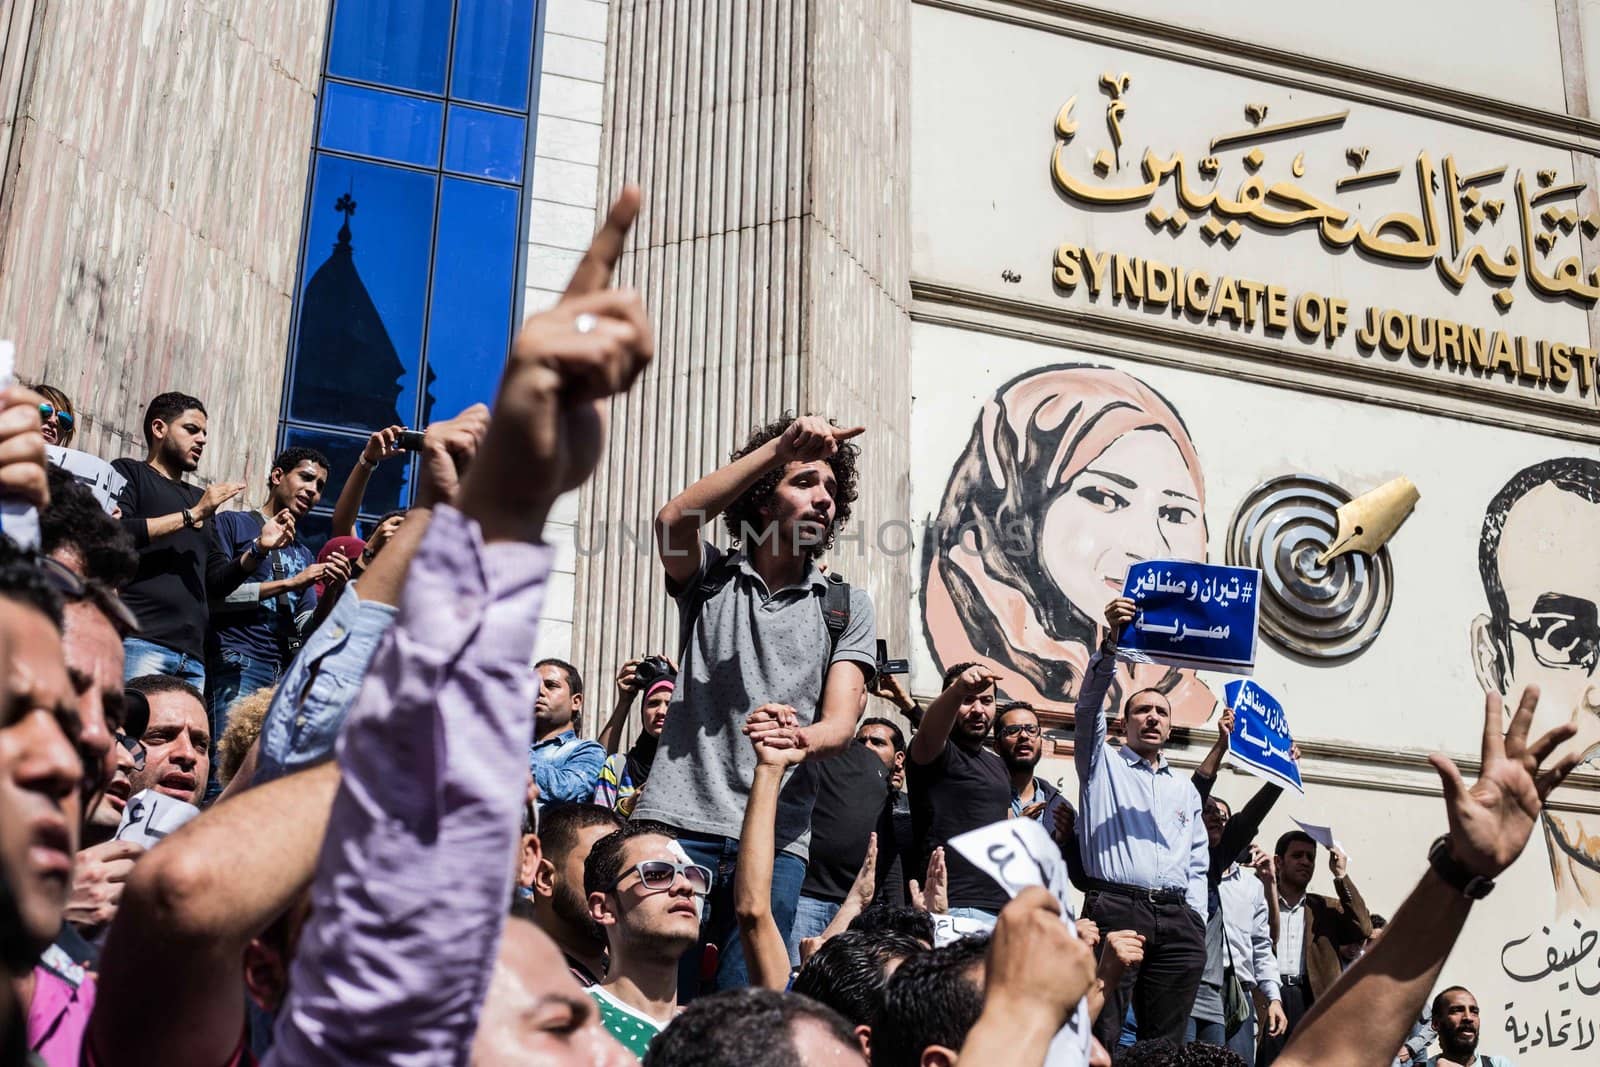 EGYPT, Cairo: People chant slogans and hold signs during a protest against the decision to hand over control of two strategic Red Sea islands, namely Tiran and Sanafir, to Saudi Arabia, in front of the Syndicate of Journalists building, in Cairo, on April 15, 2016.